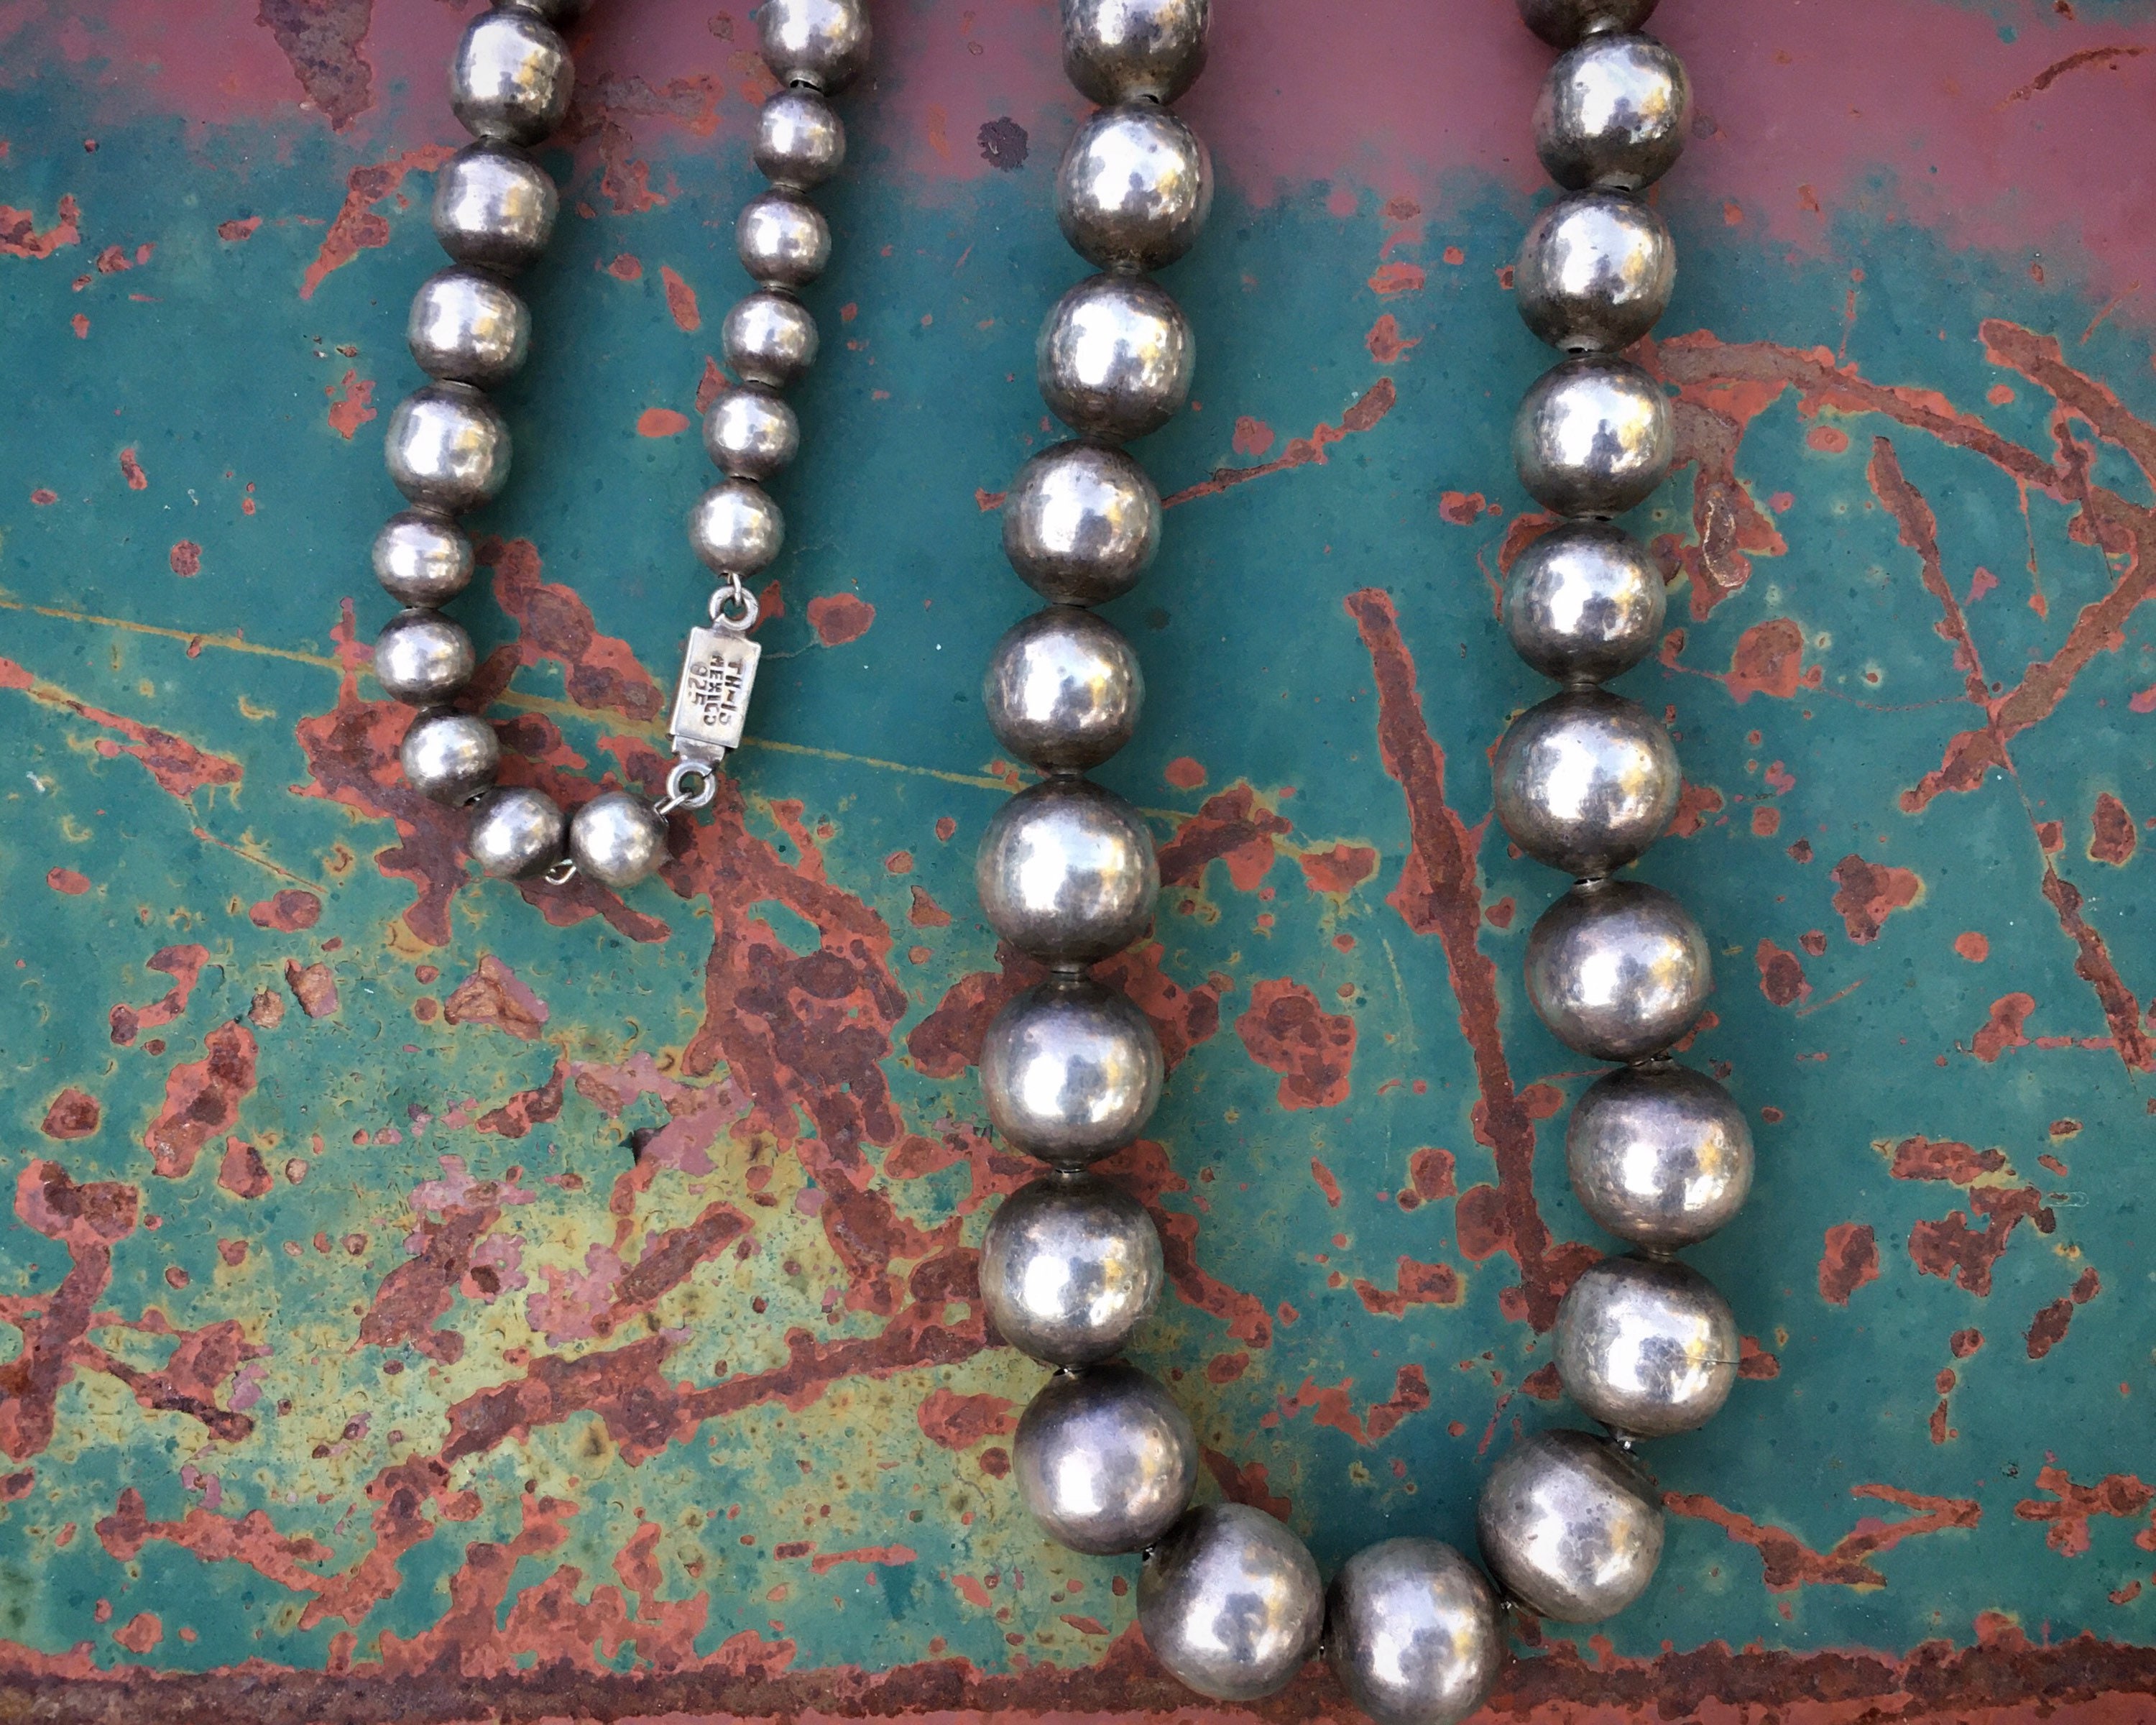 Vintage smooth sterling silver round beads, Mexico. 1940s-50s. b18-674